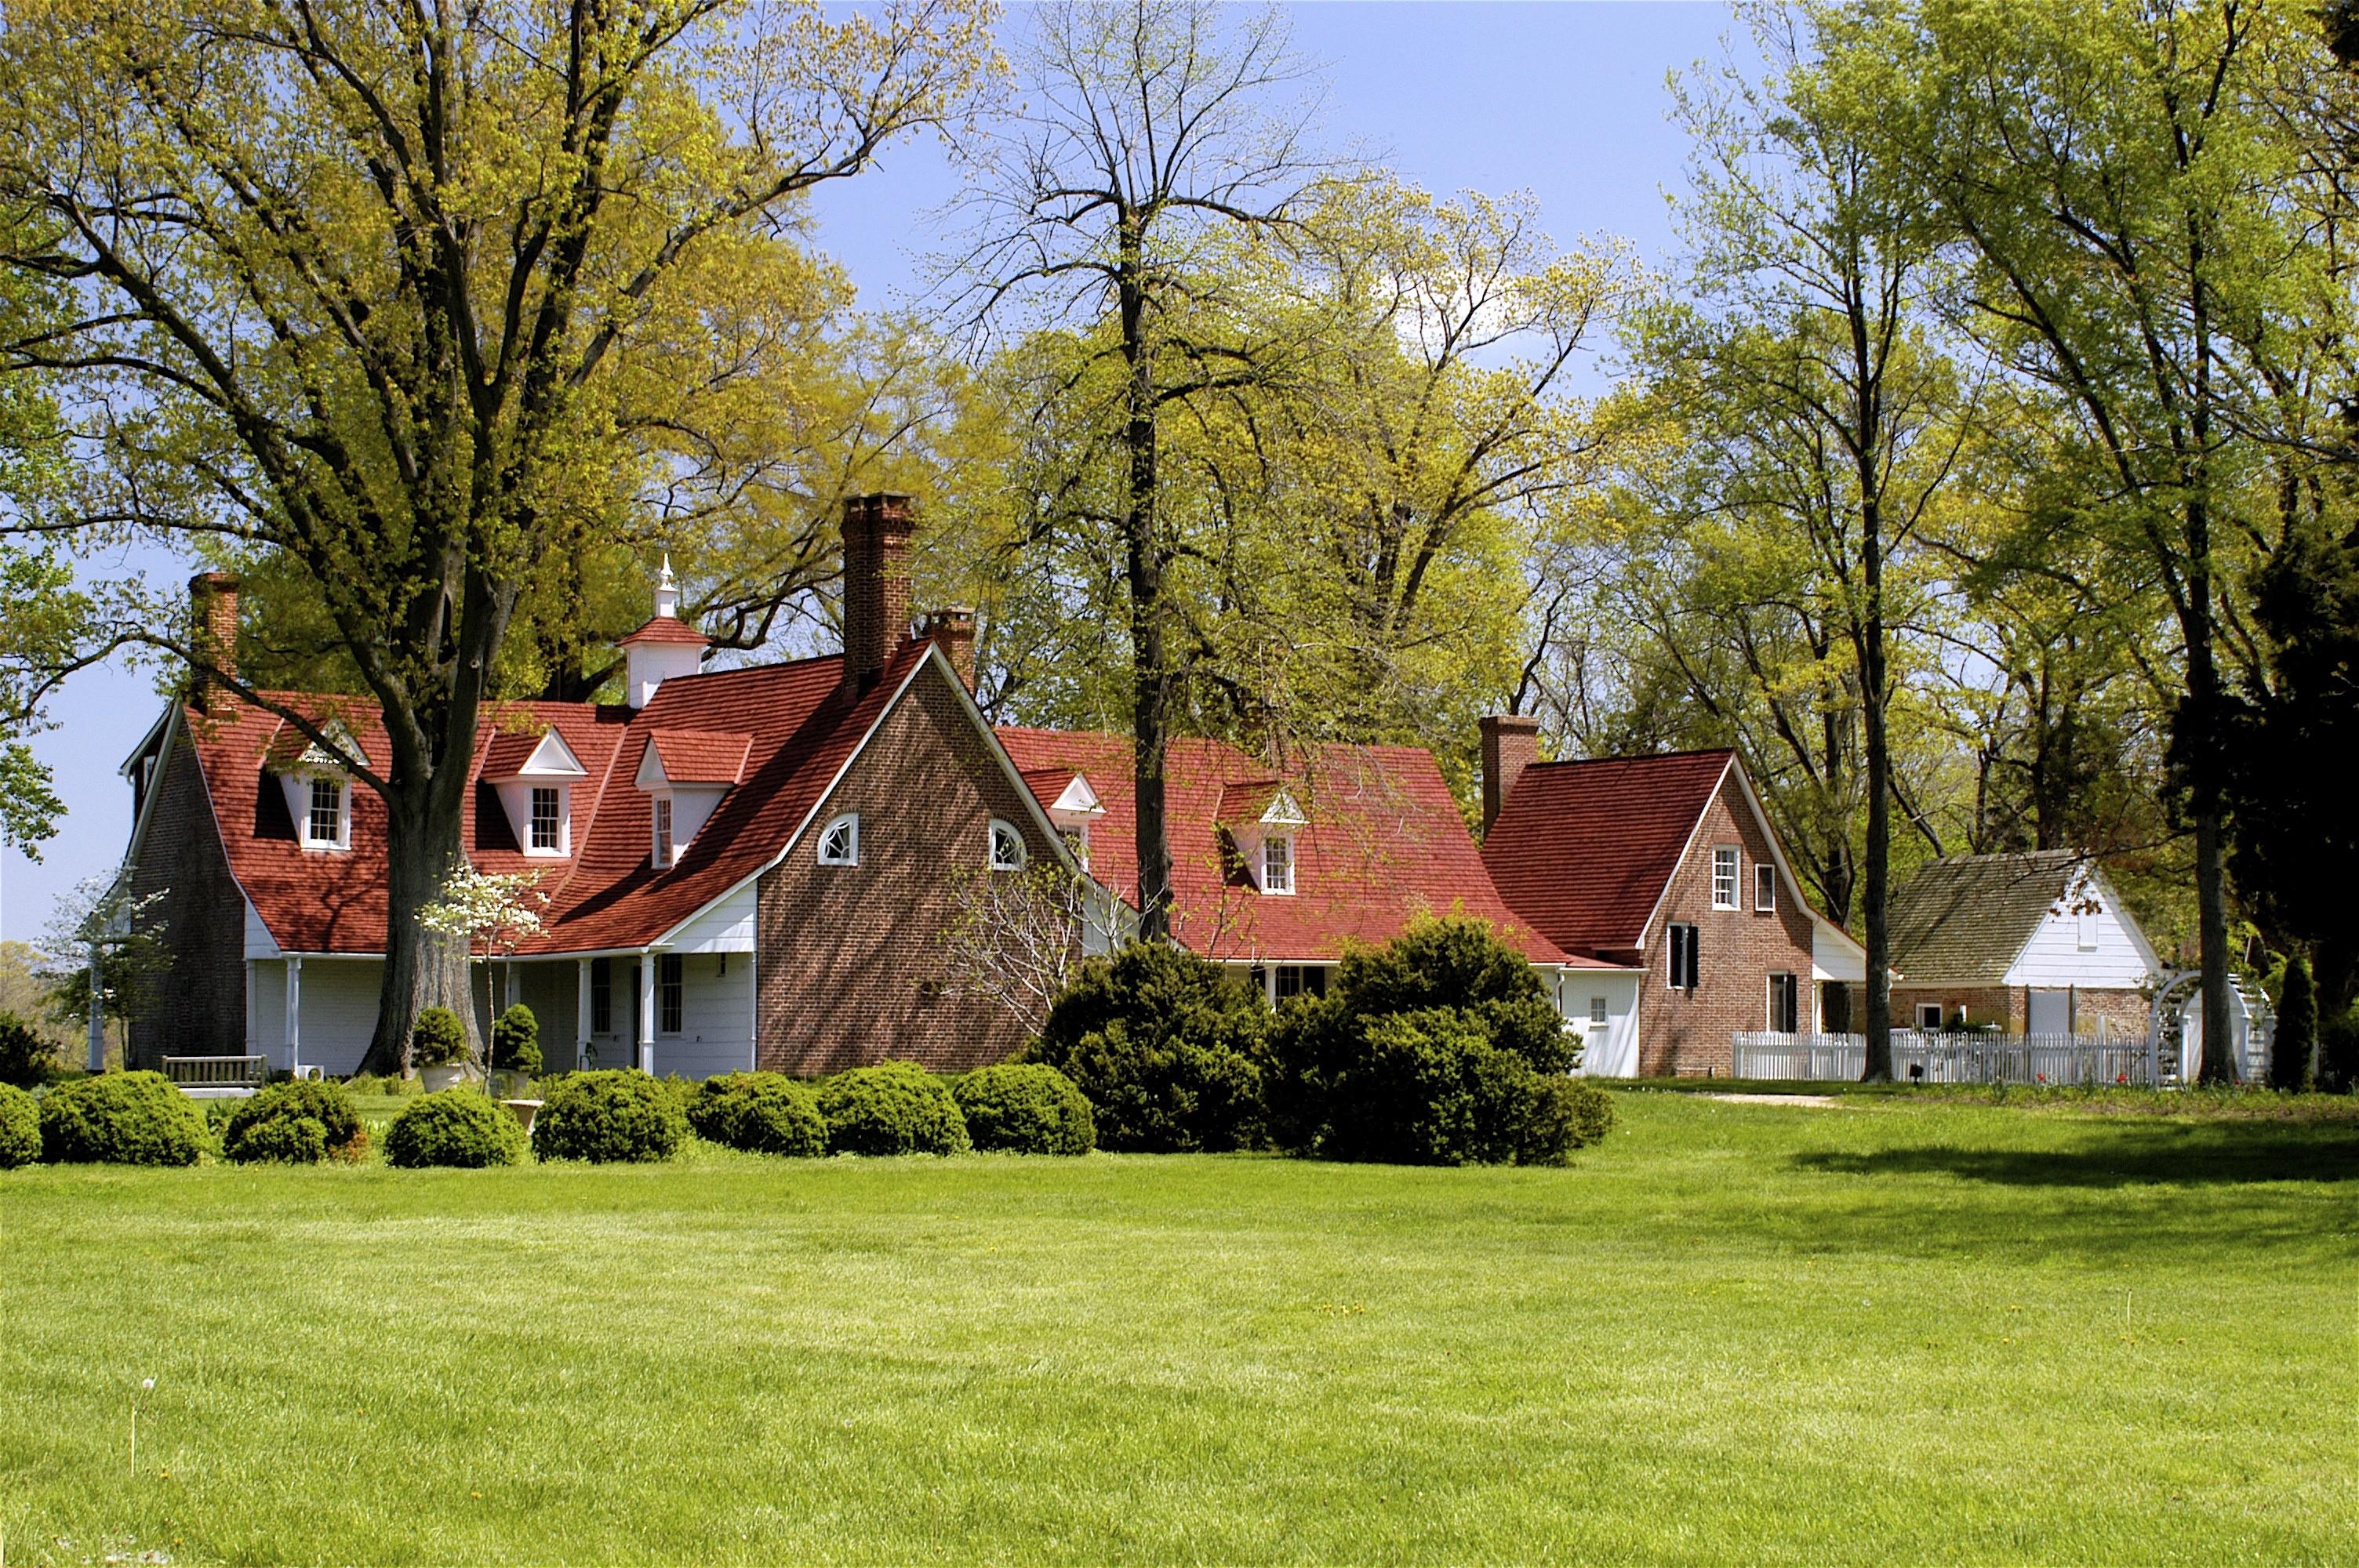 Image of a large historic house with green lawn in foreground.